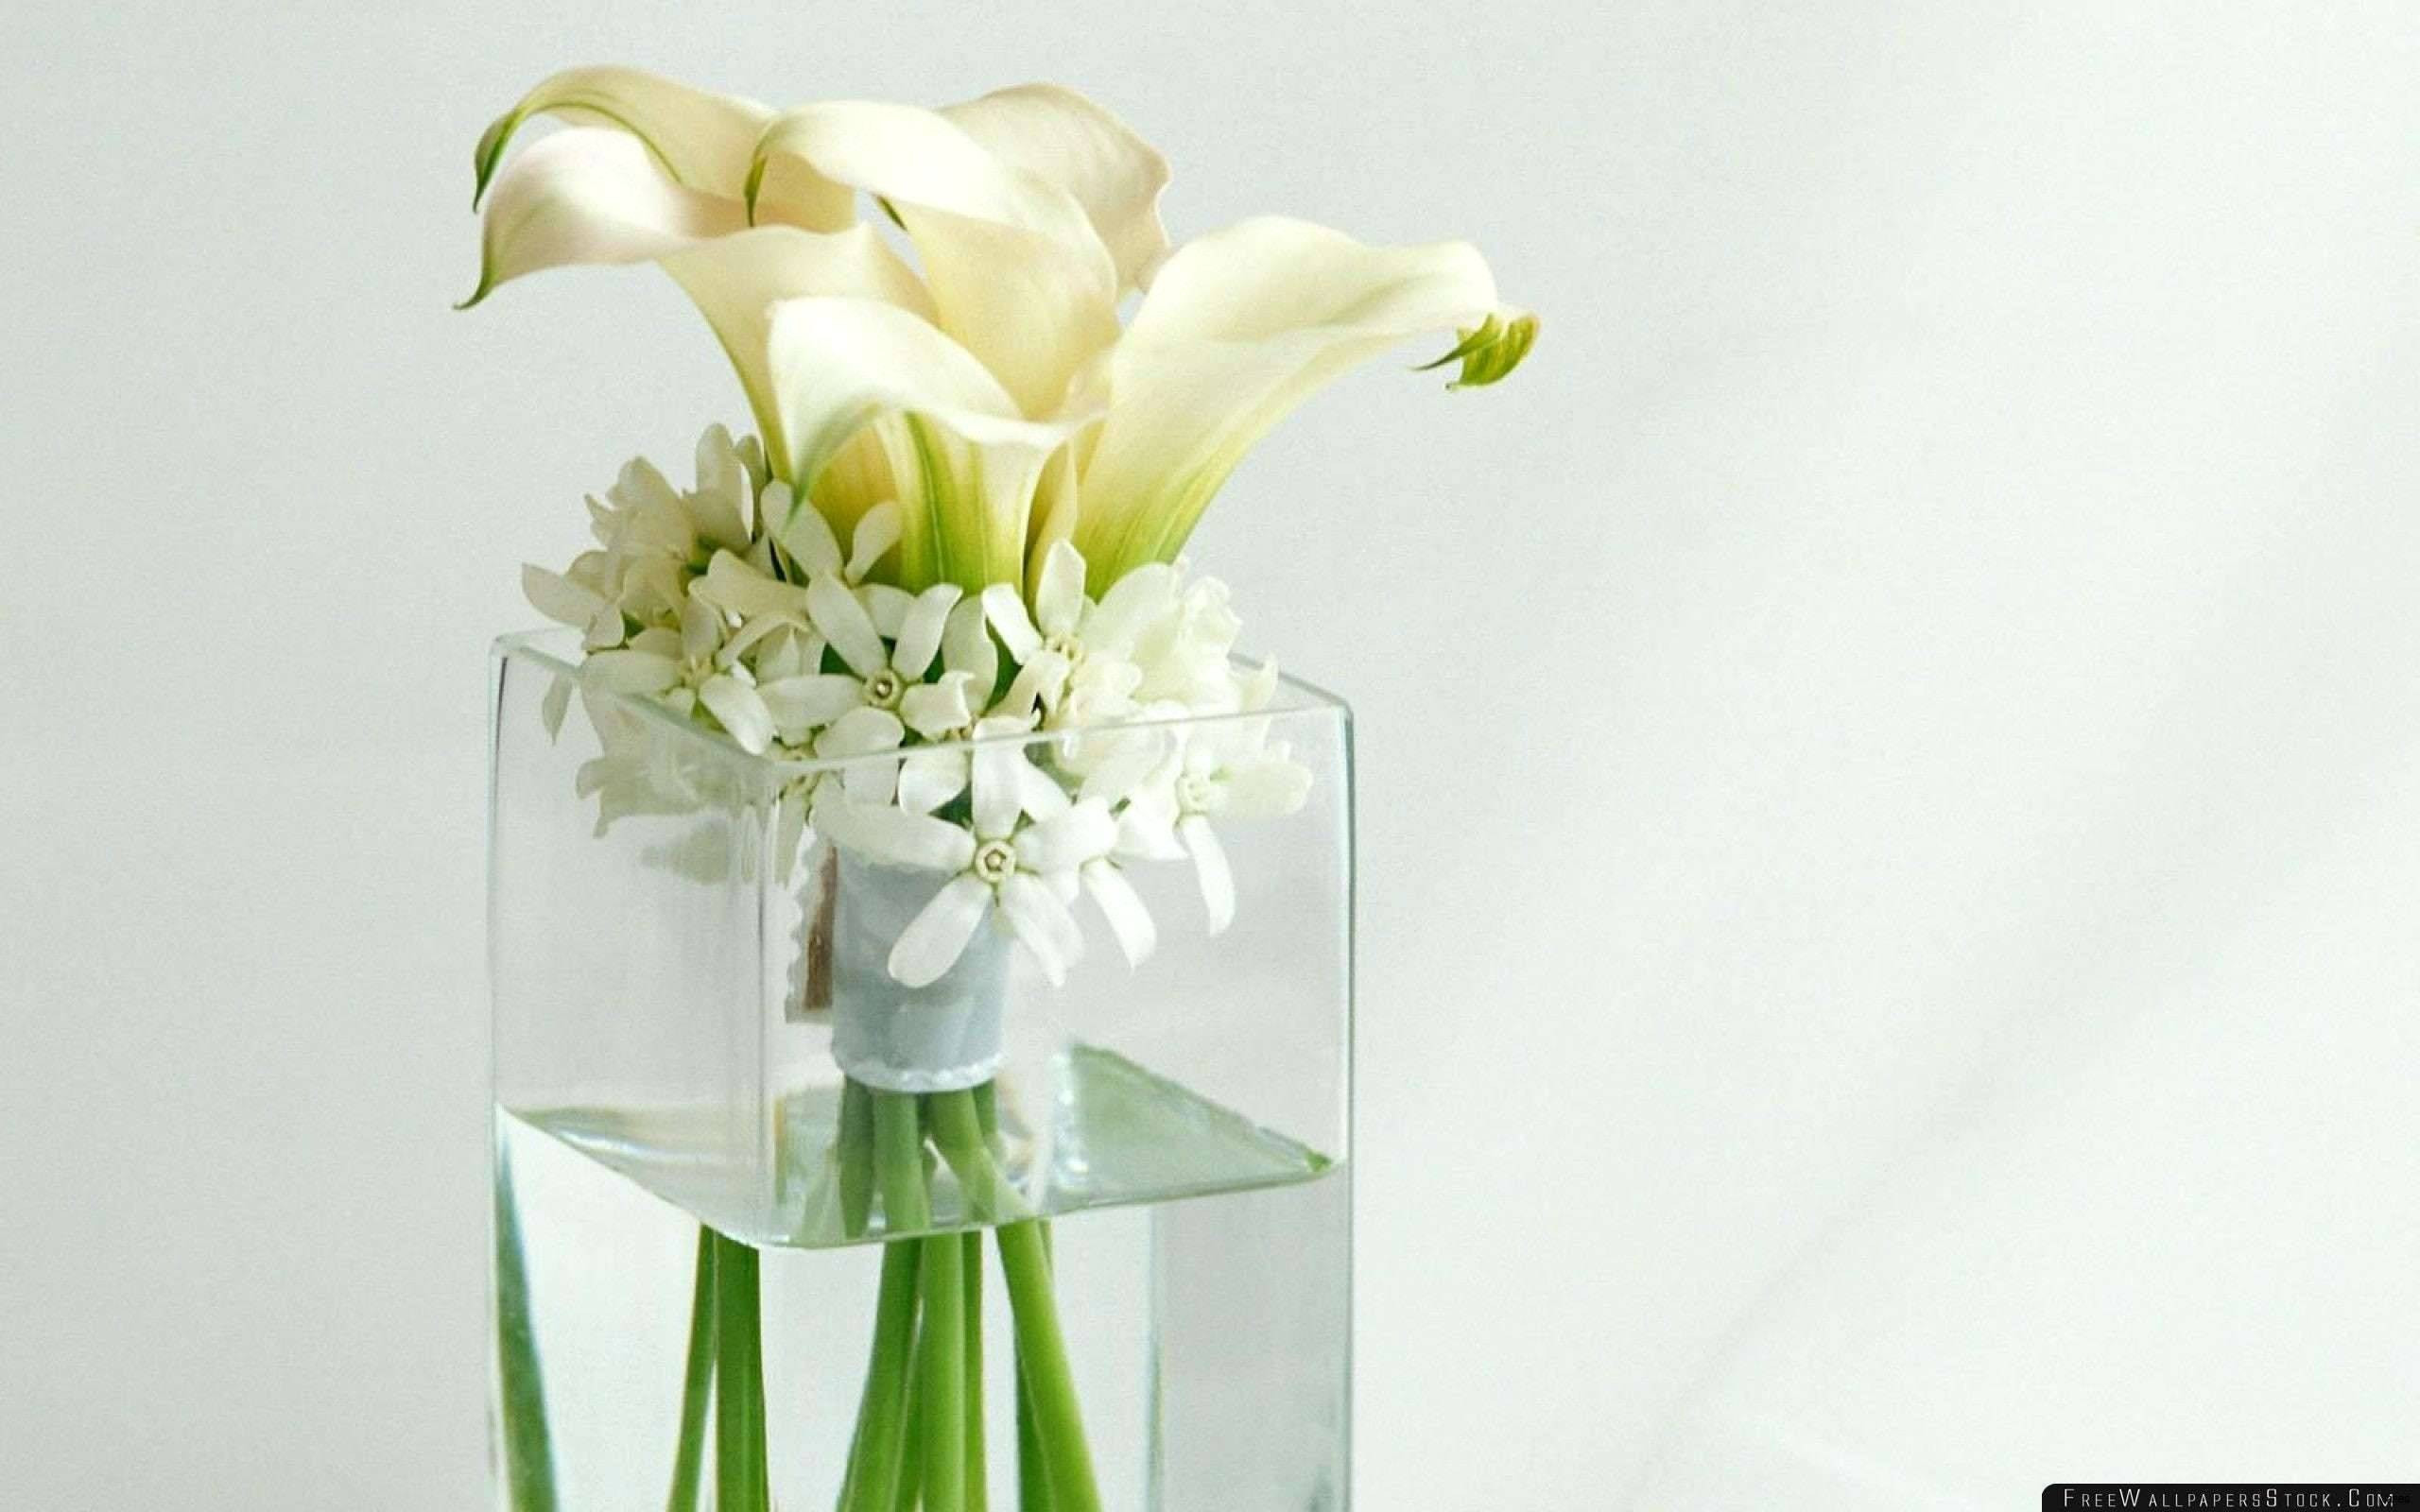 tall cream vase of black and white wedding decor ideas awesome tall vase centerpiece intended for black and white wedding decor ideas awesome tall vase centerpiece ideas vases flowers in water 0d